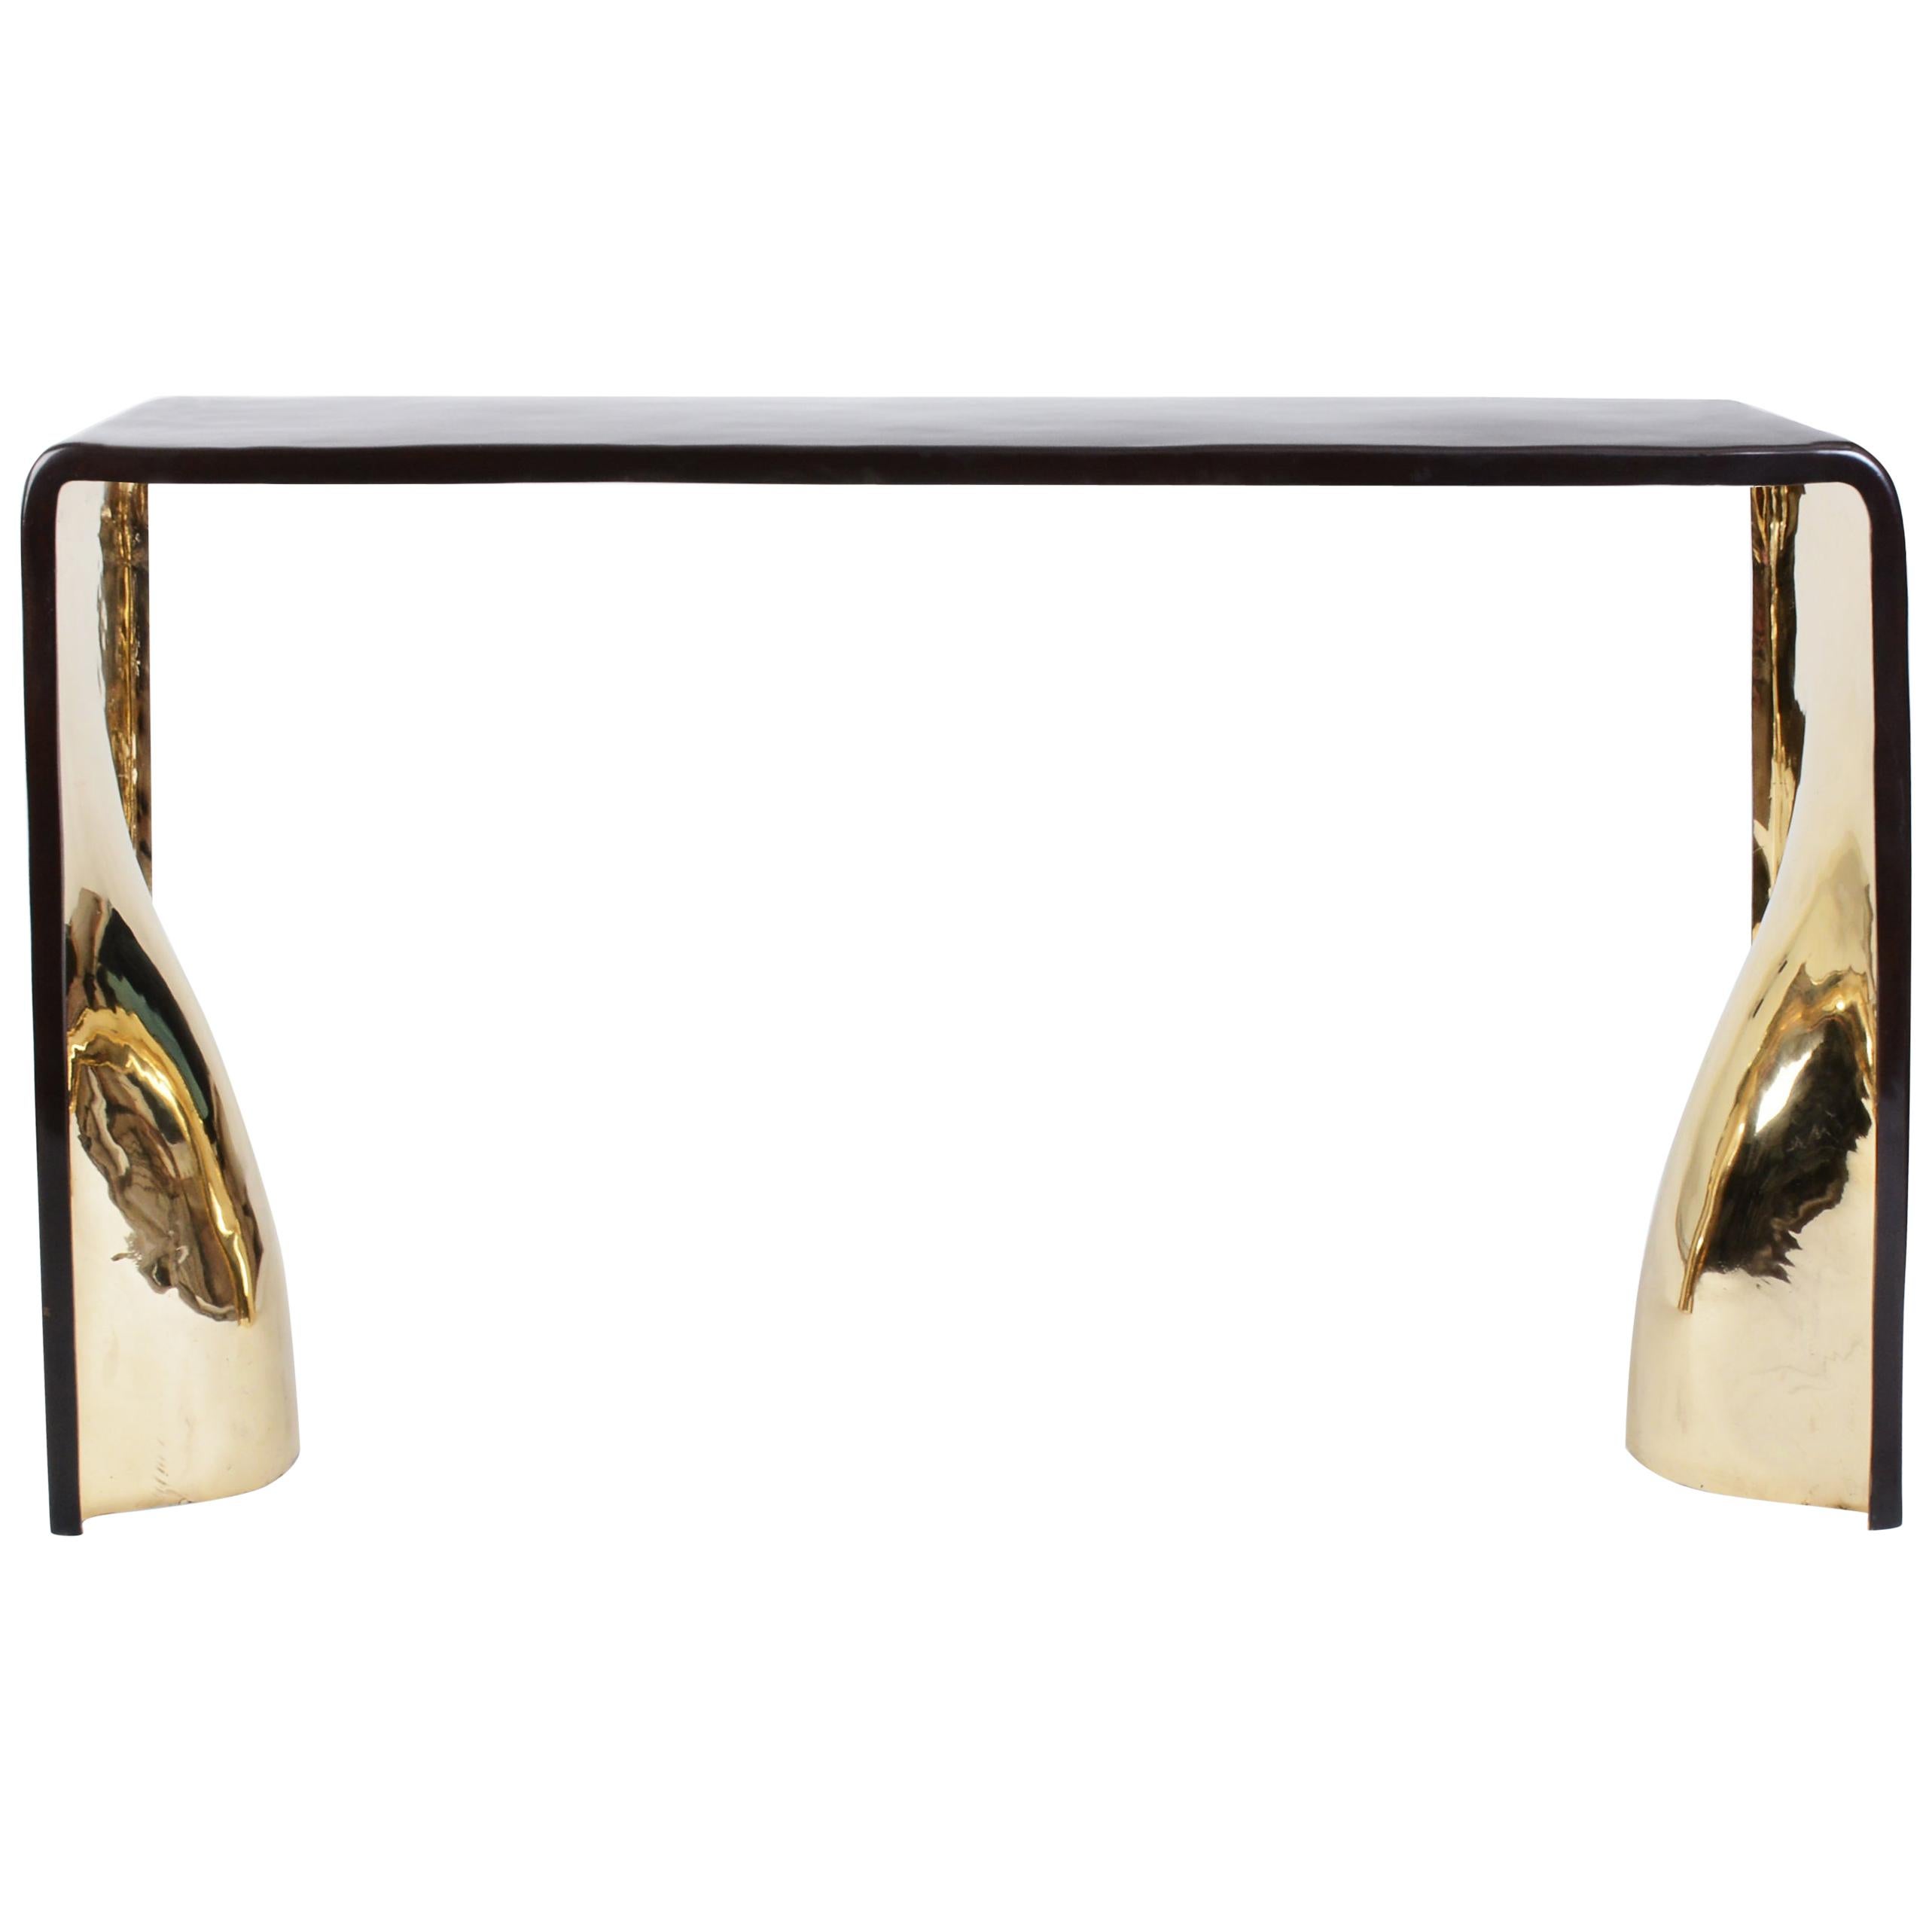 Console Cast in Dark Bronze with Polished Gold Bronze Interior by Elan Atelier